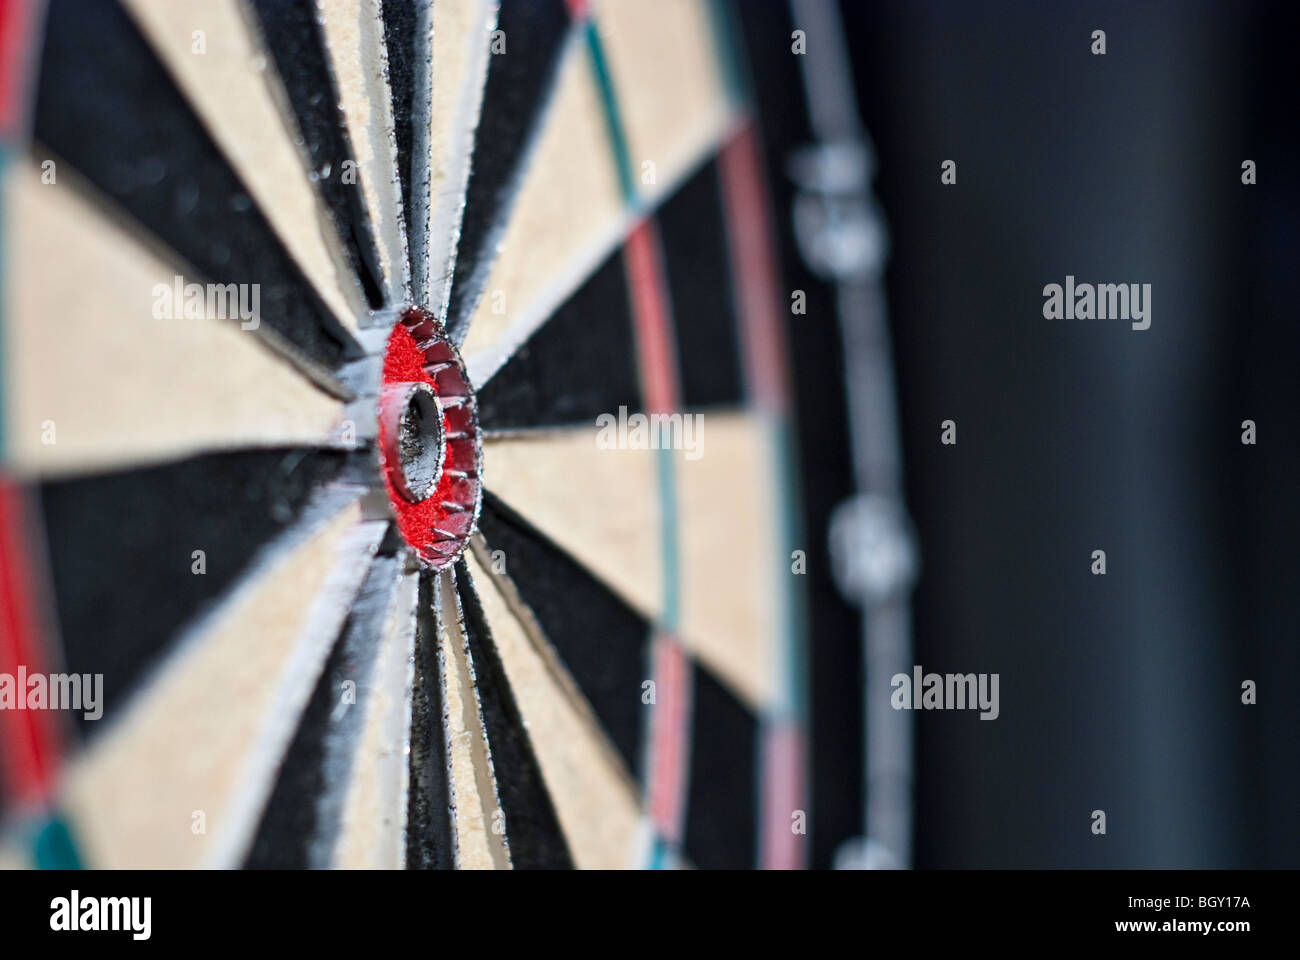 close-up of a bullseye of a dartboard, taken from an angle with shallow depth of field Stock Photo